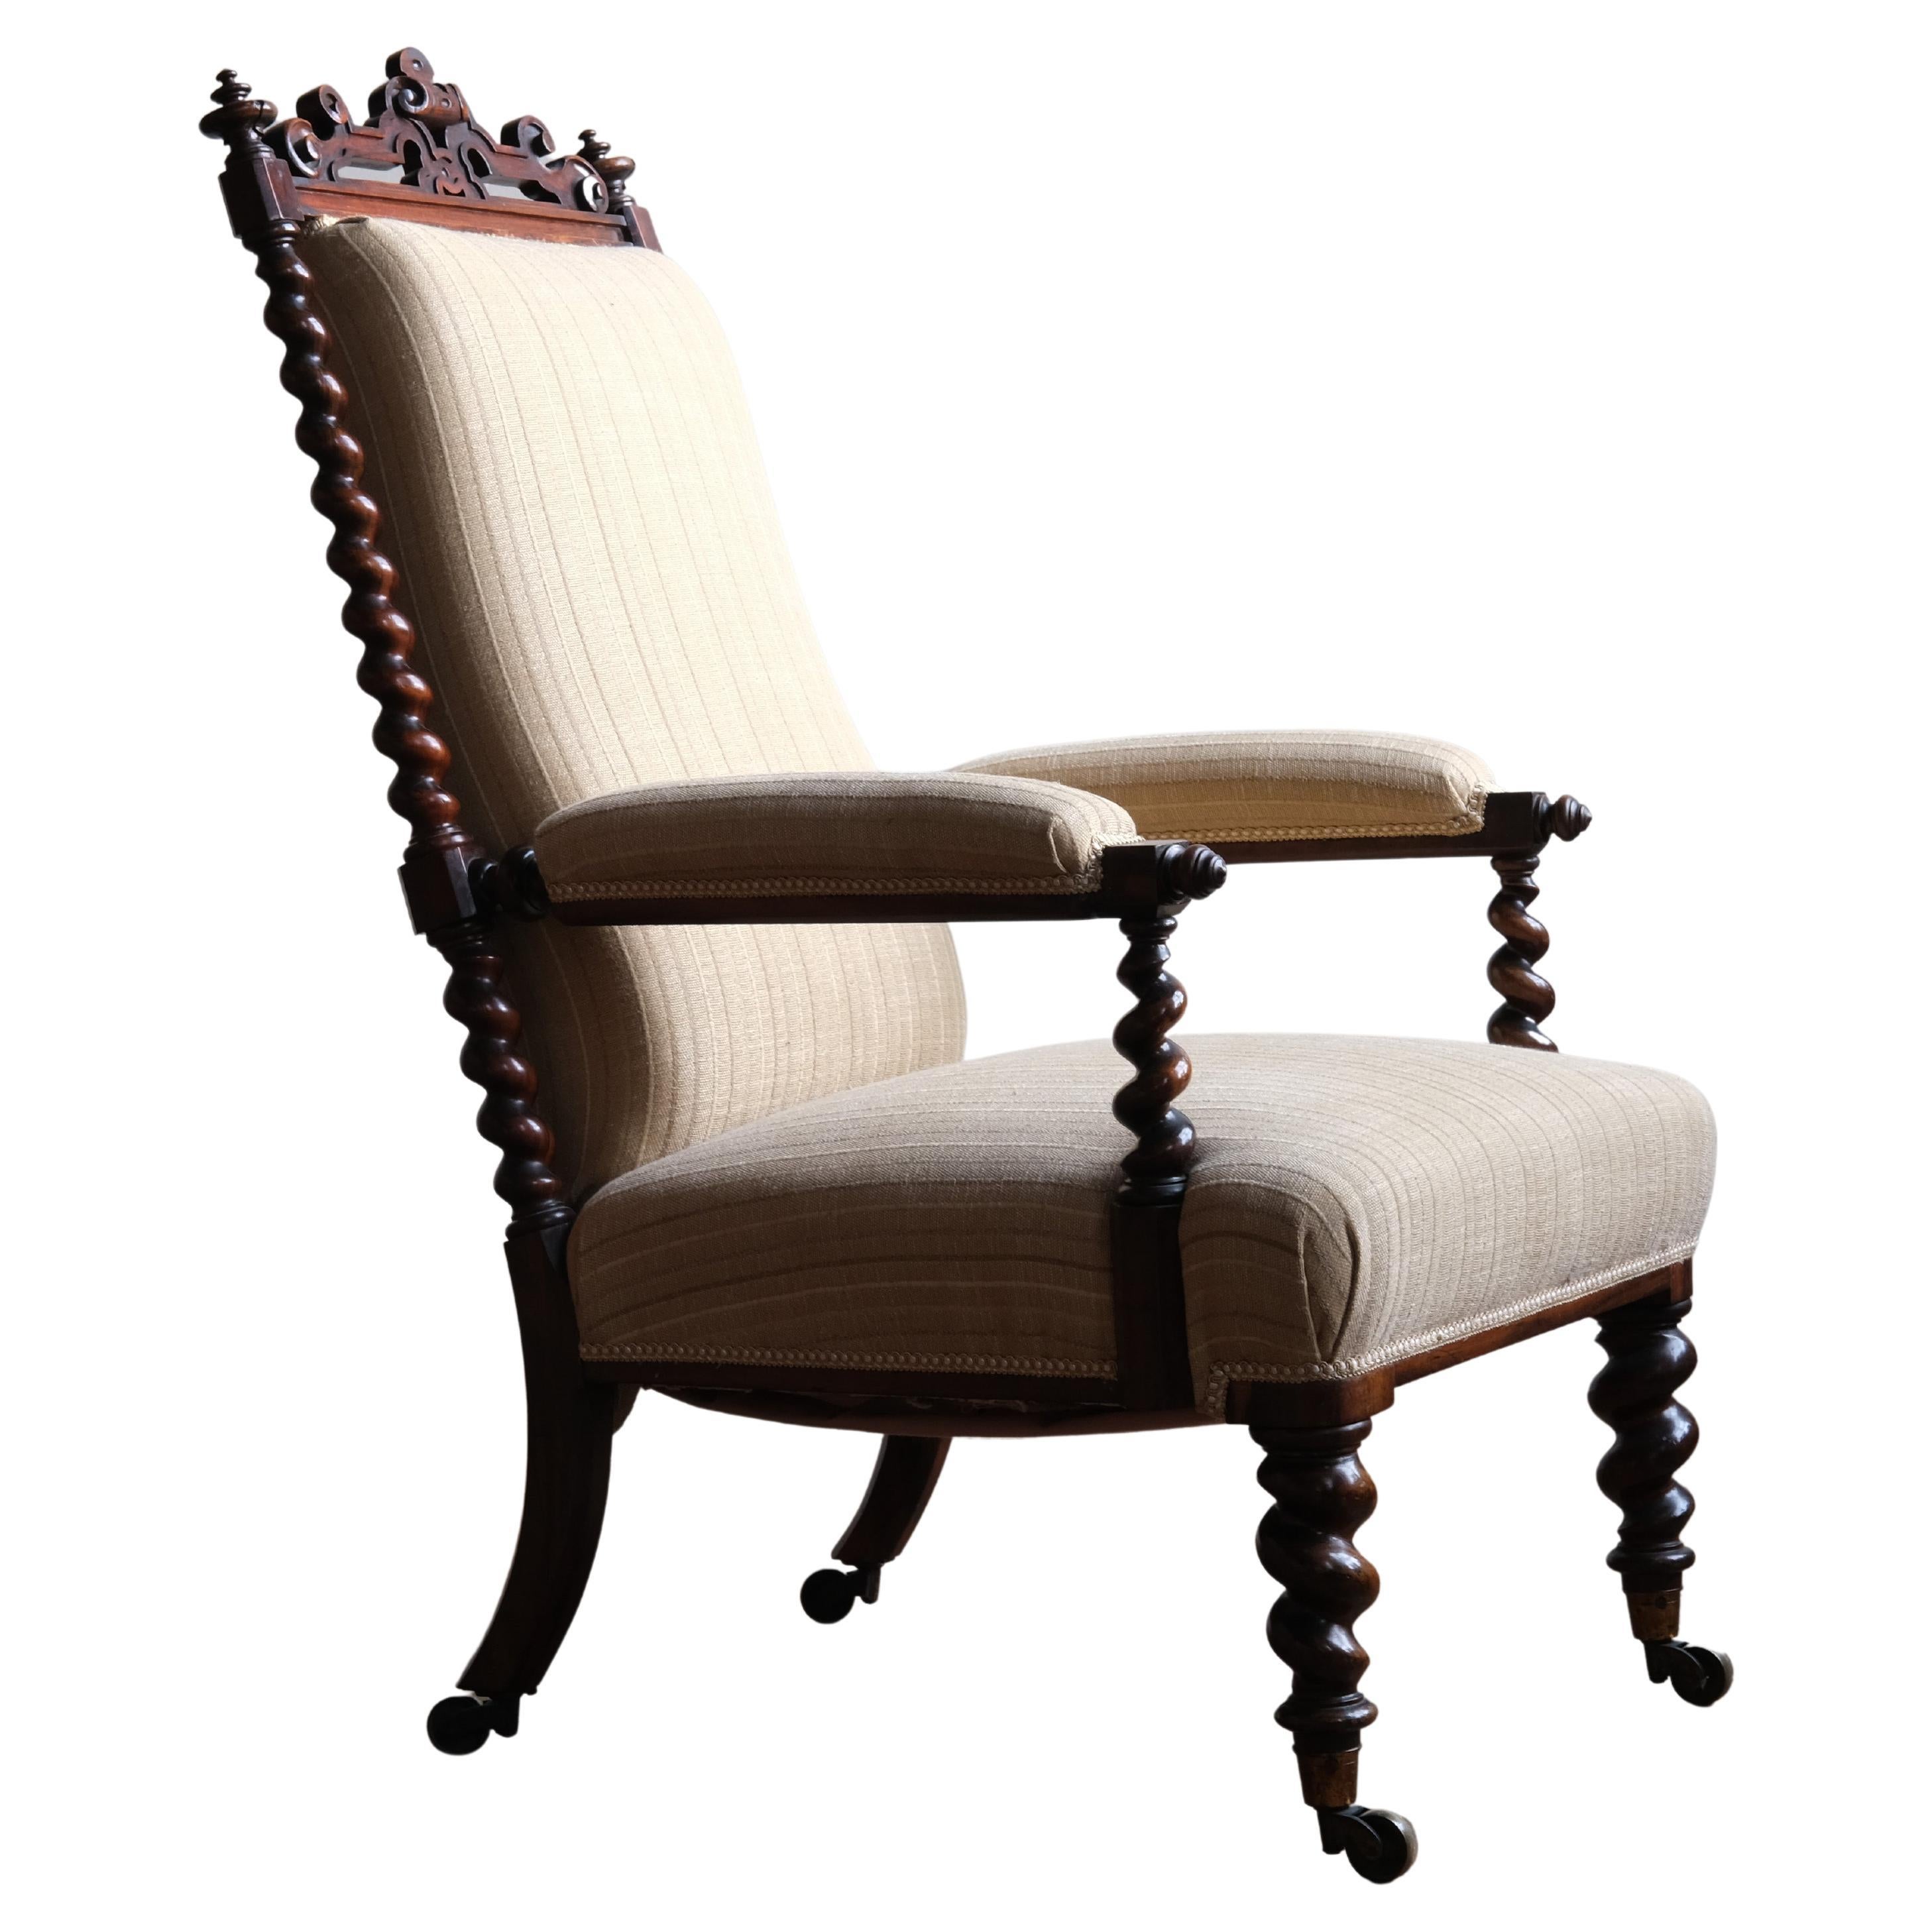 Miles and Edwards Rosewood Open Armchair, circa 1840